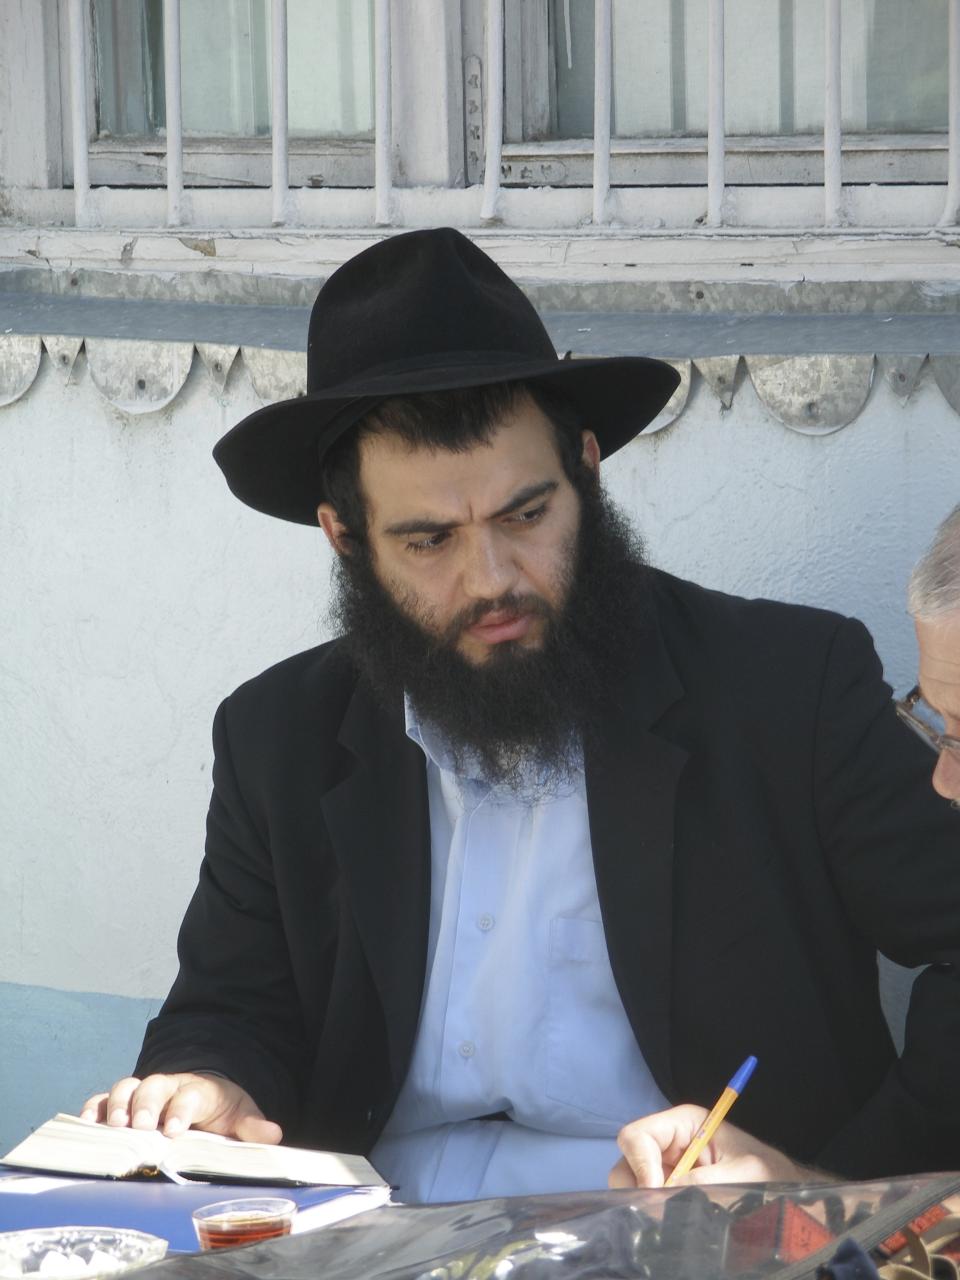 FILE - This photo shows Rabbi Ovadia Isakov as he speaks to a journalist in Derbent, Russia, on Thursday, Sept. 26, 2005. He was shot by a gunman on Wednesday, July 24, 2013, but recovered. Jews in the predominantly Muslim region of Dagestan in southern Russia say they are determined to regroup and rebuild following a deadly attack by Islamic militants on June 23 on Christian and Jewish houses of worship in Derbent and the regional capital of Makhachkala. (Natalya Krainova)/NewsTeam via AP)